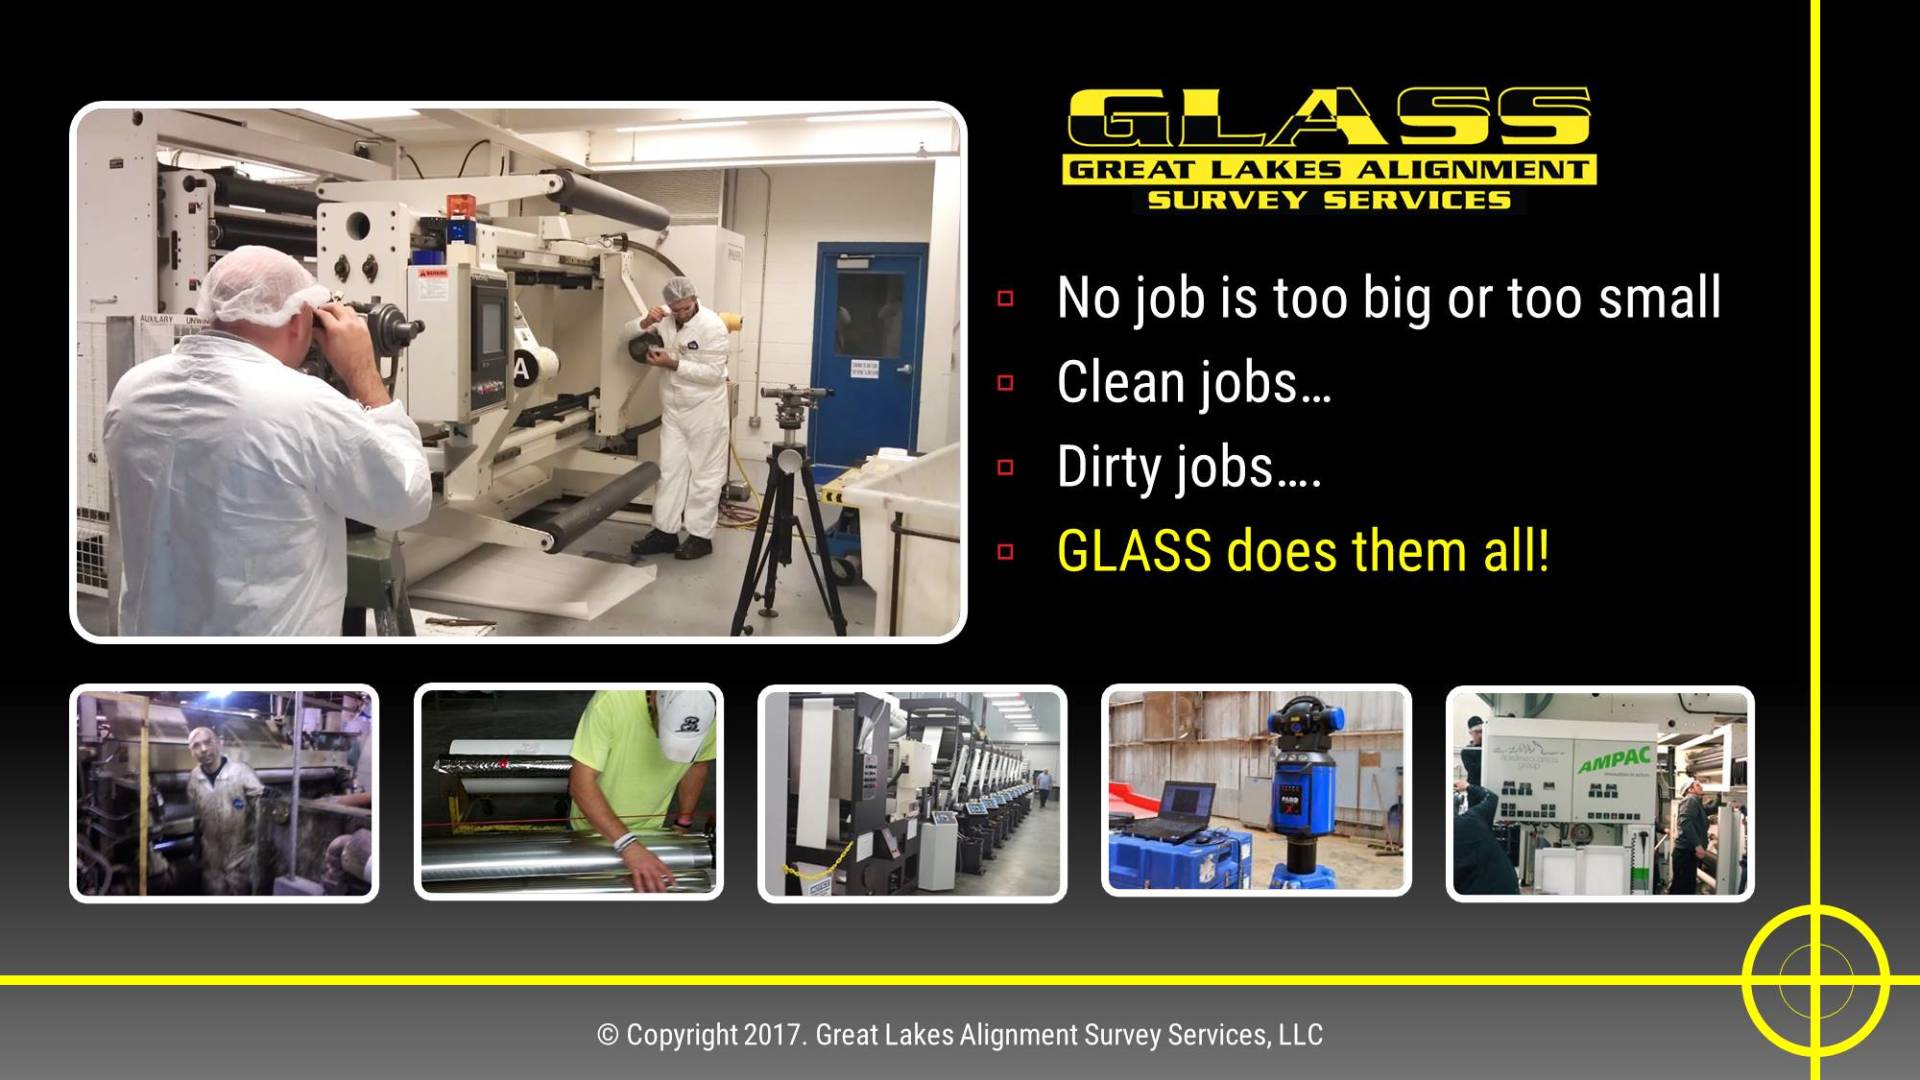 GLASS does alignment services of all types, clean jobs, dirty jobs